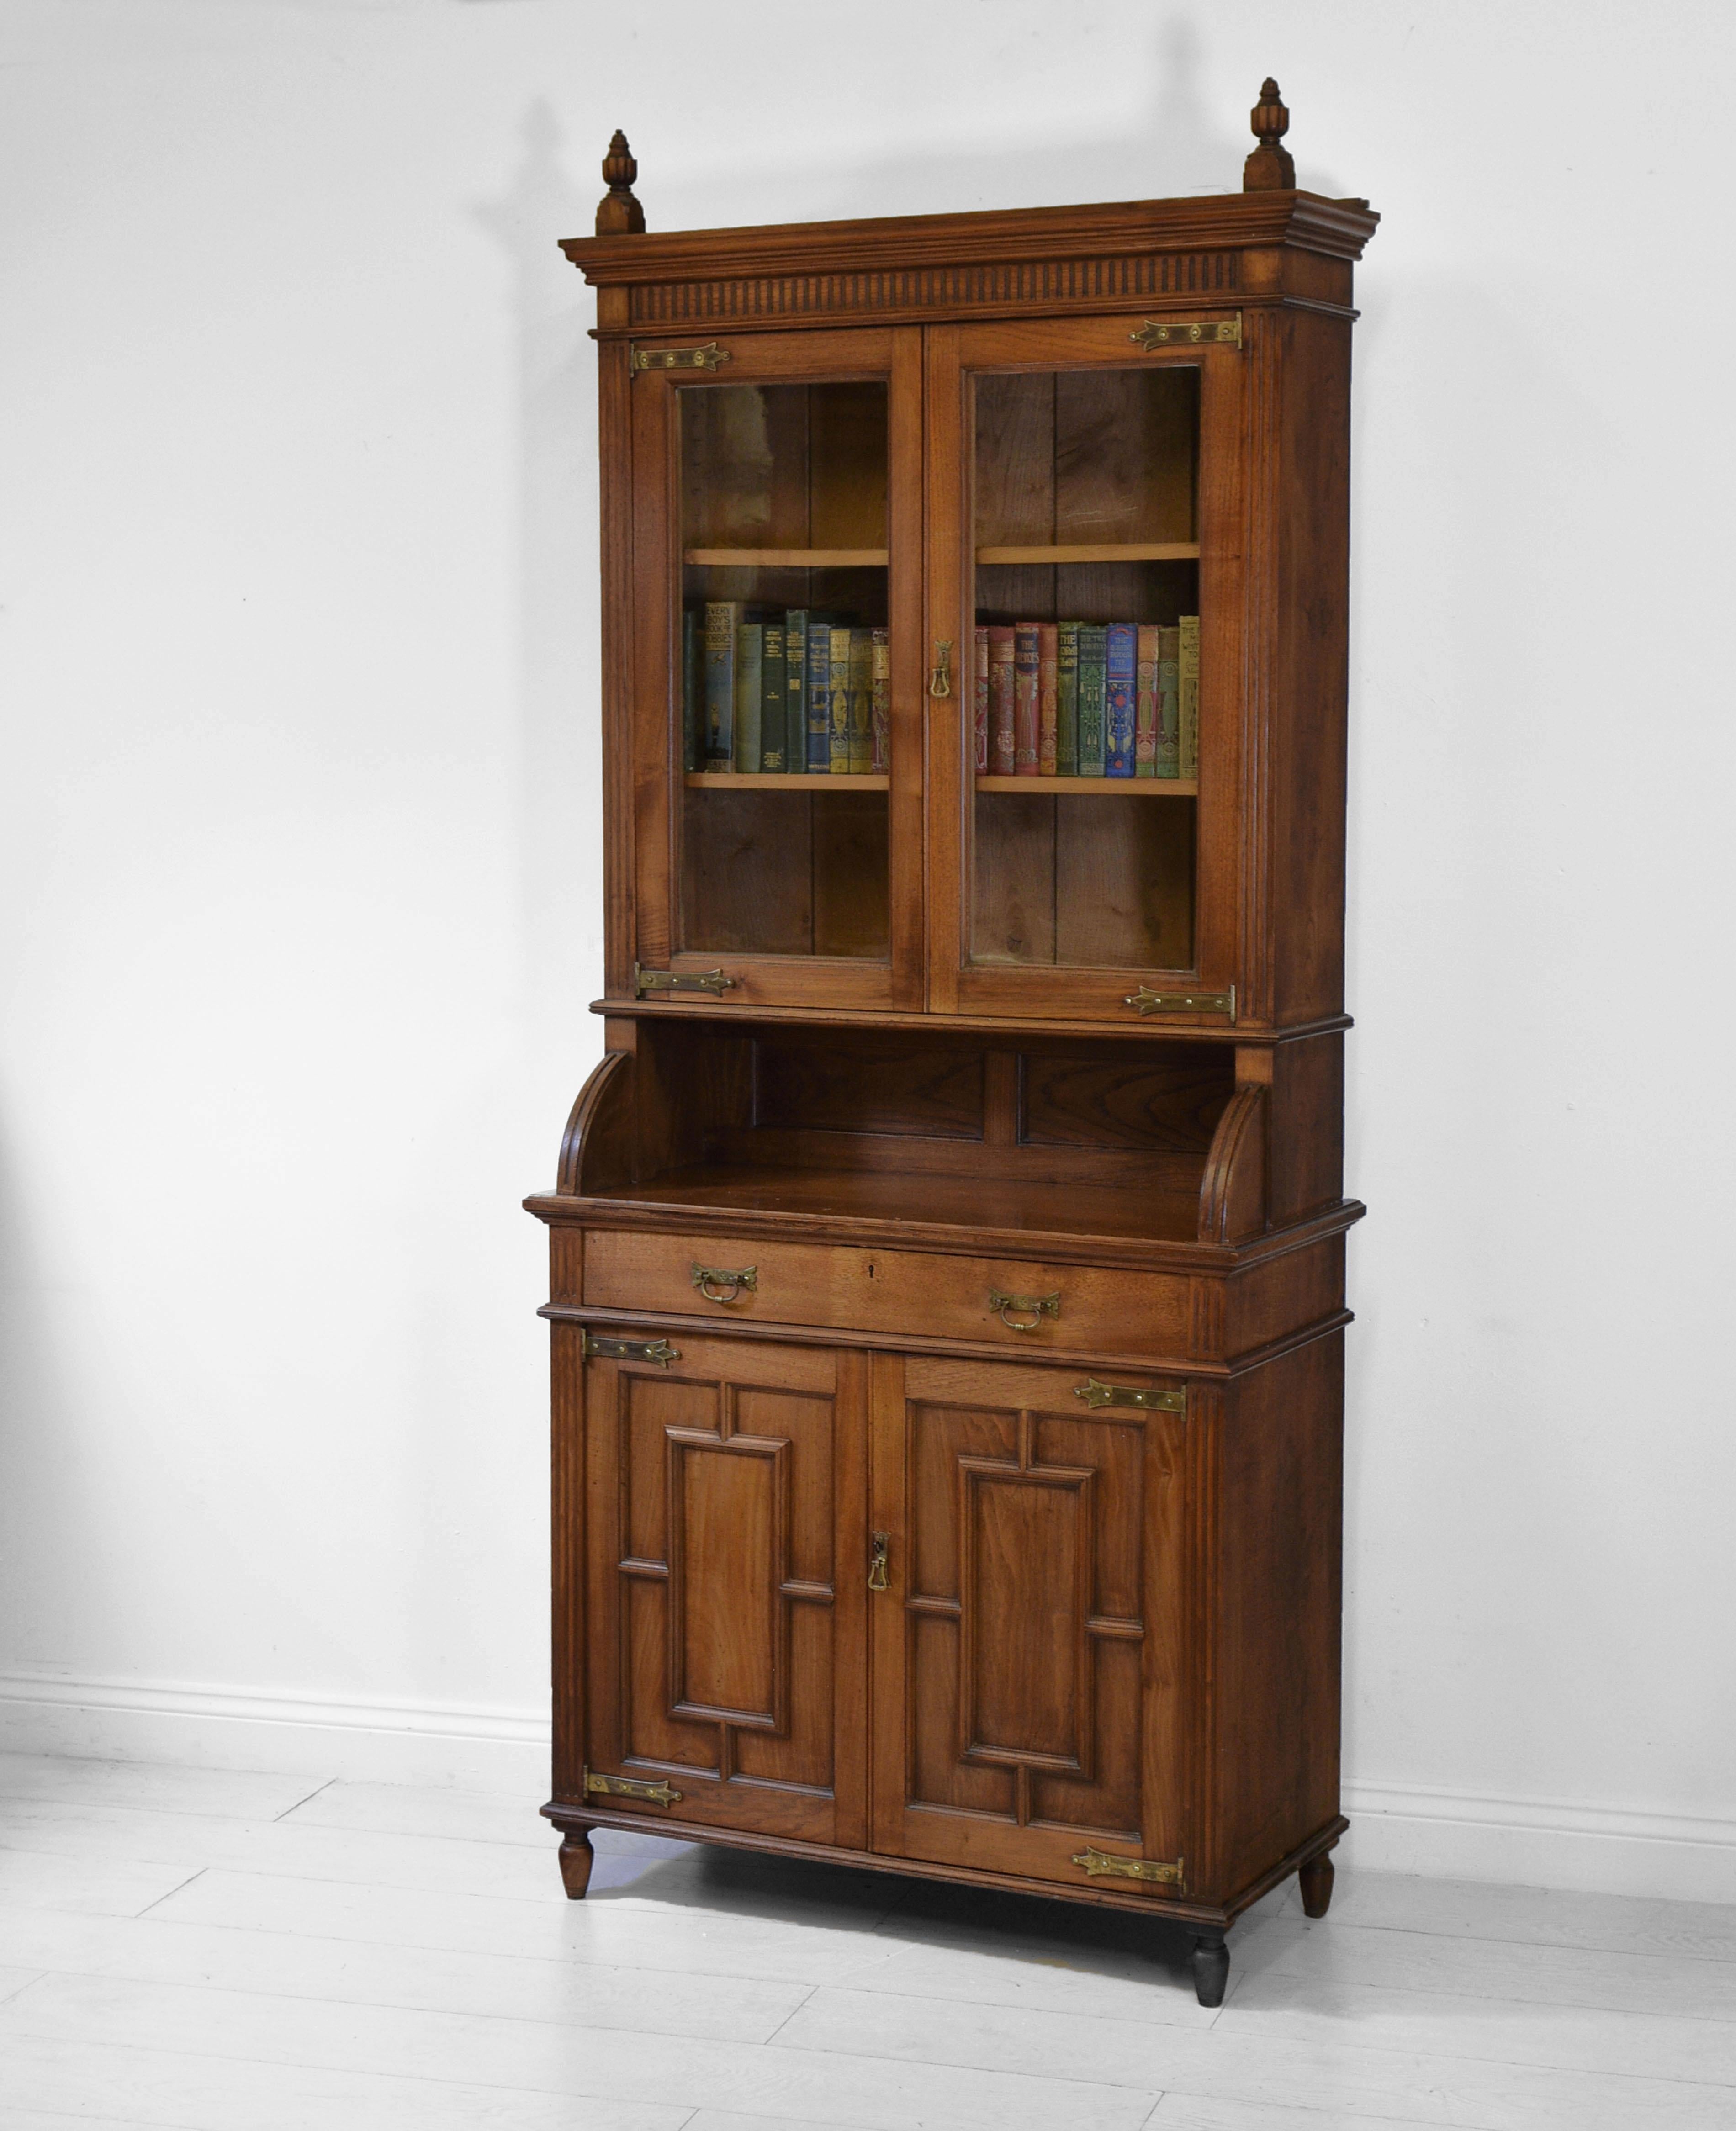 An American Aesthetic Movement chestnut tall bookcase cabinet with brass stylised hinges and turned finials. Circa 1880.

The Aesthetic Movement started in England in the late 1860's. Its popularity spread to the United States from the mid 1870's